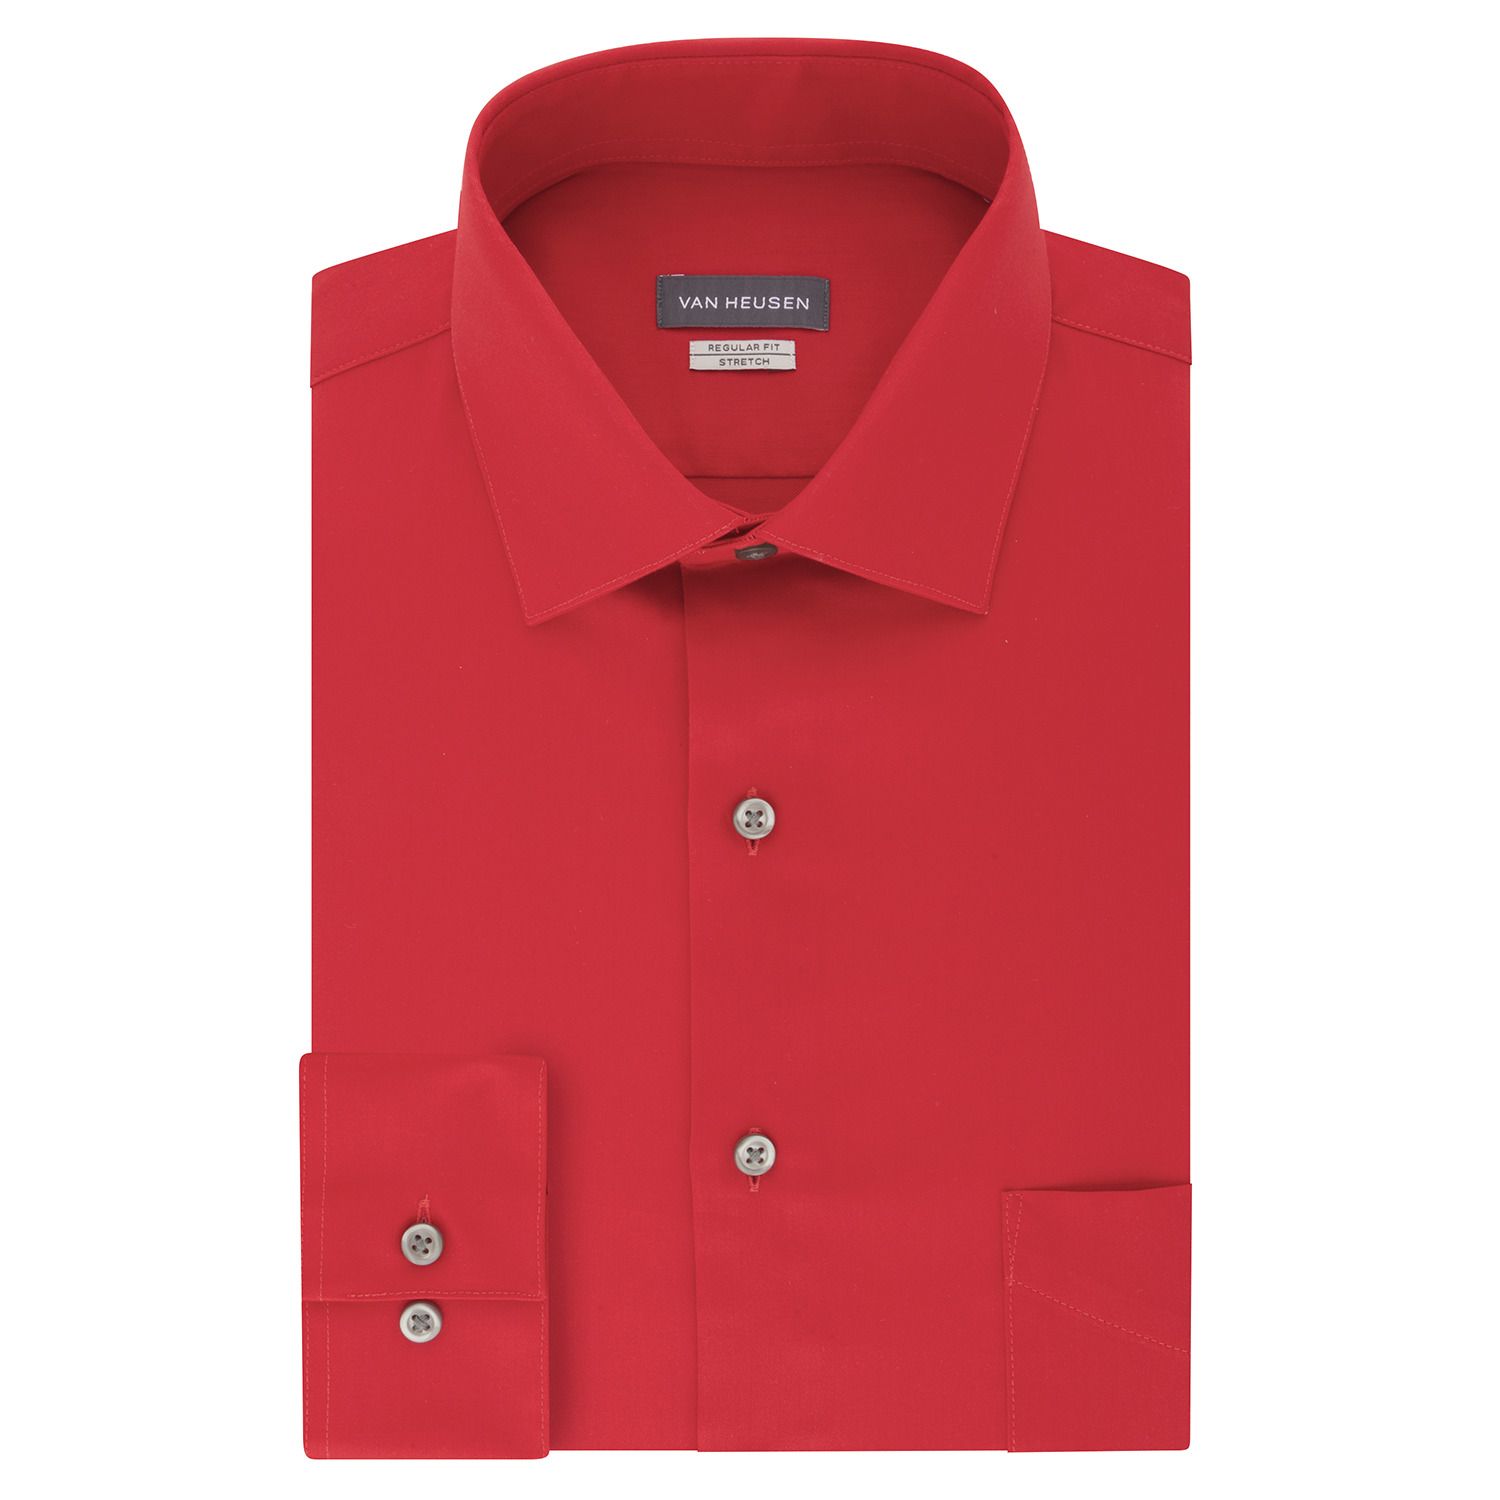 Men's Red Dress Shirts: Add Some Formal ...